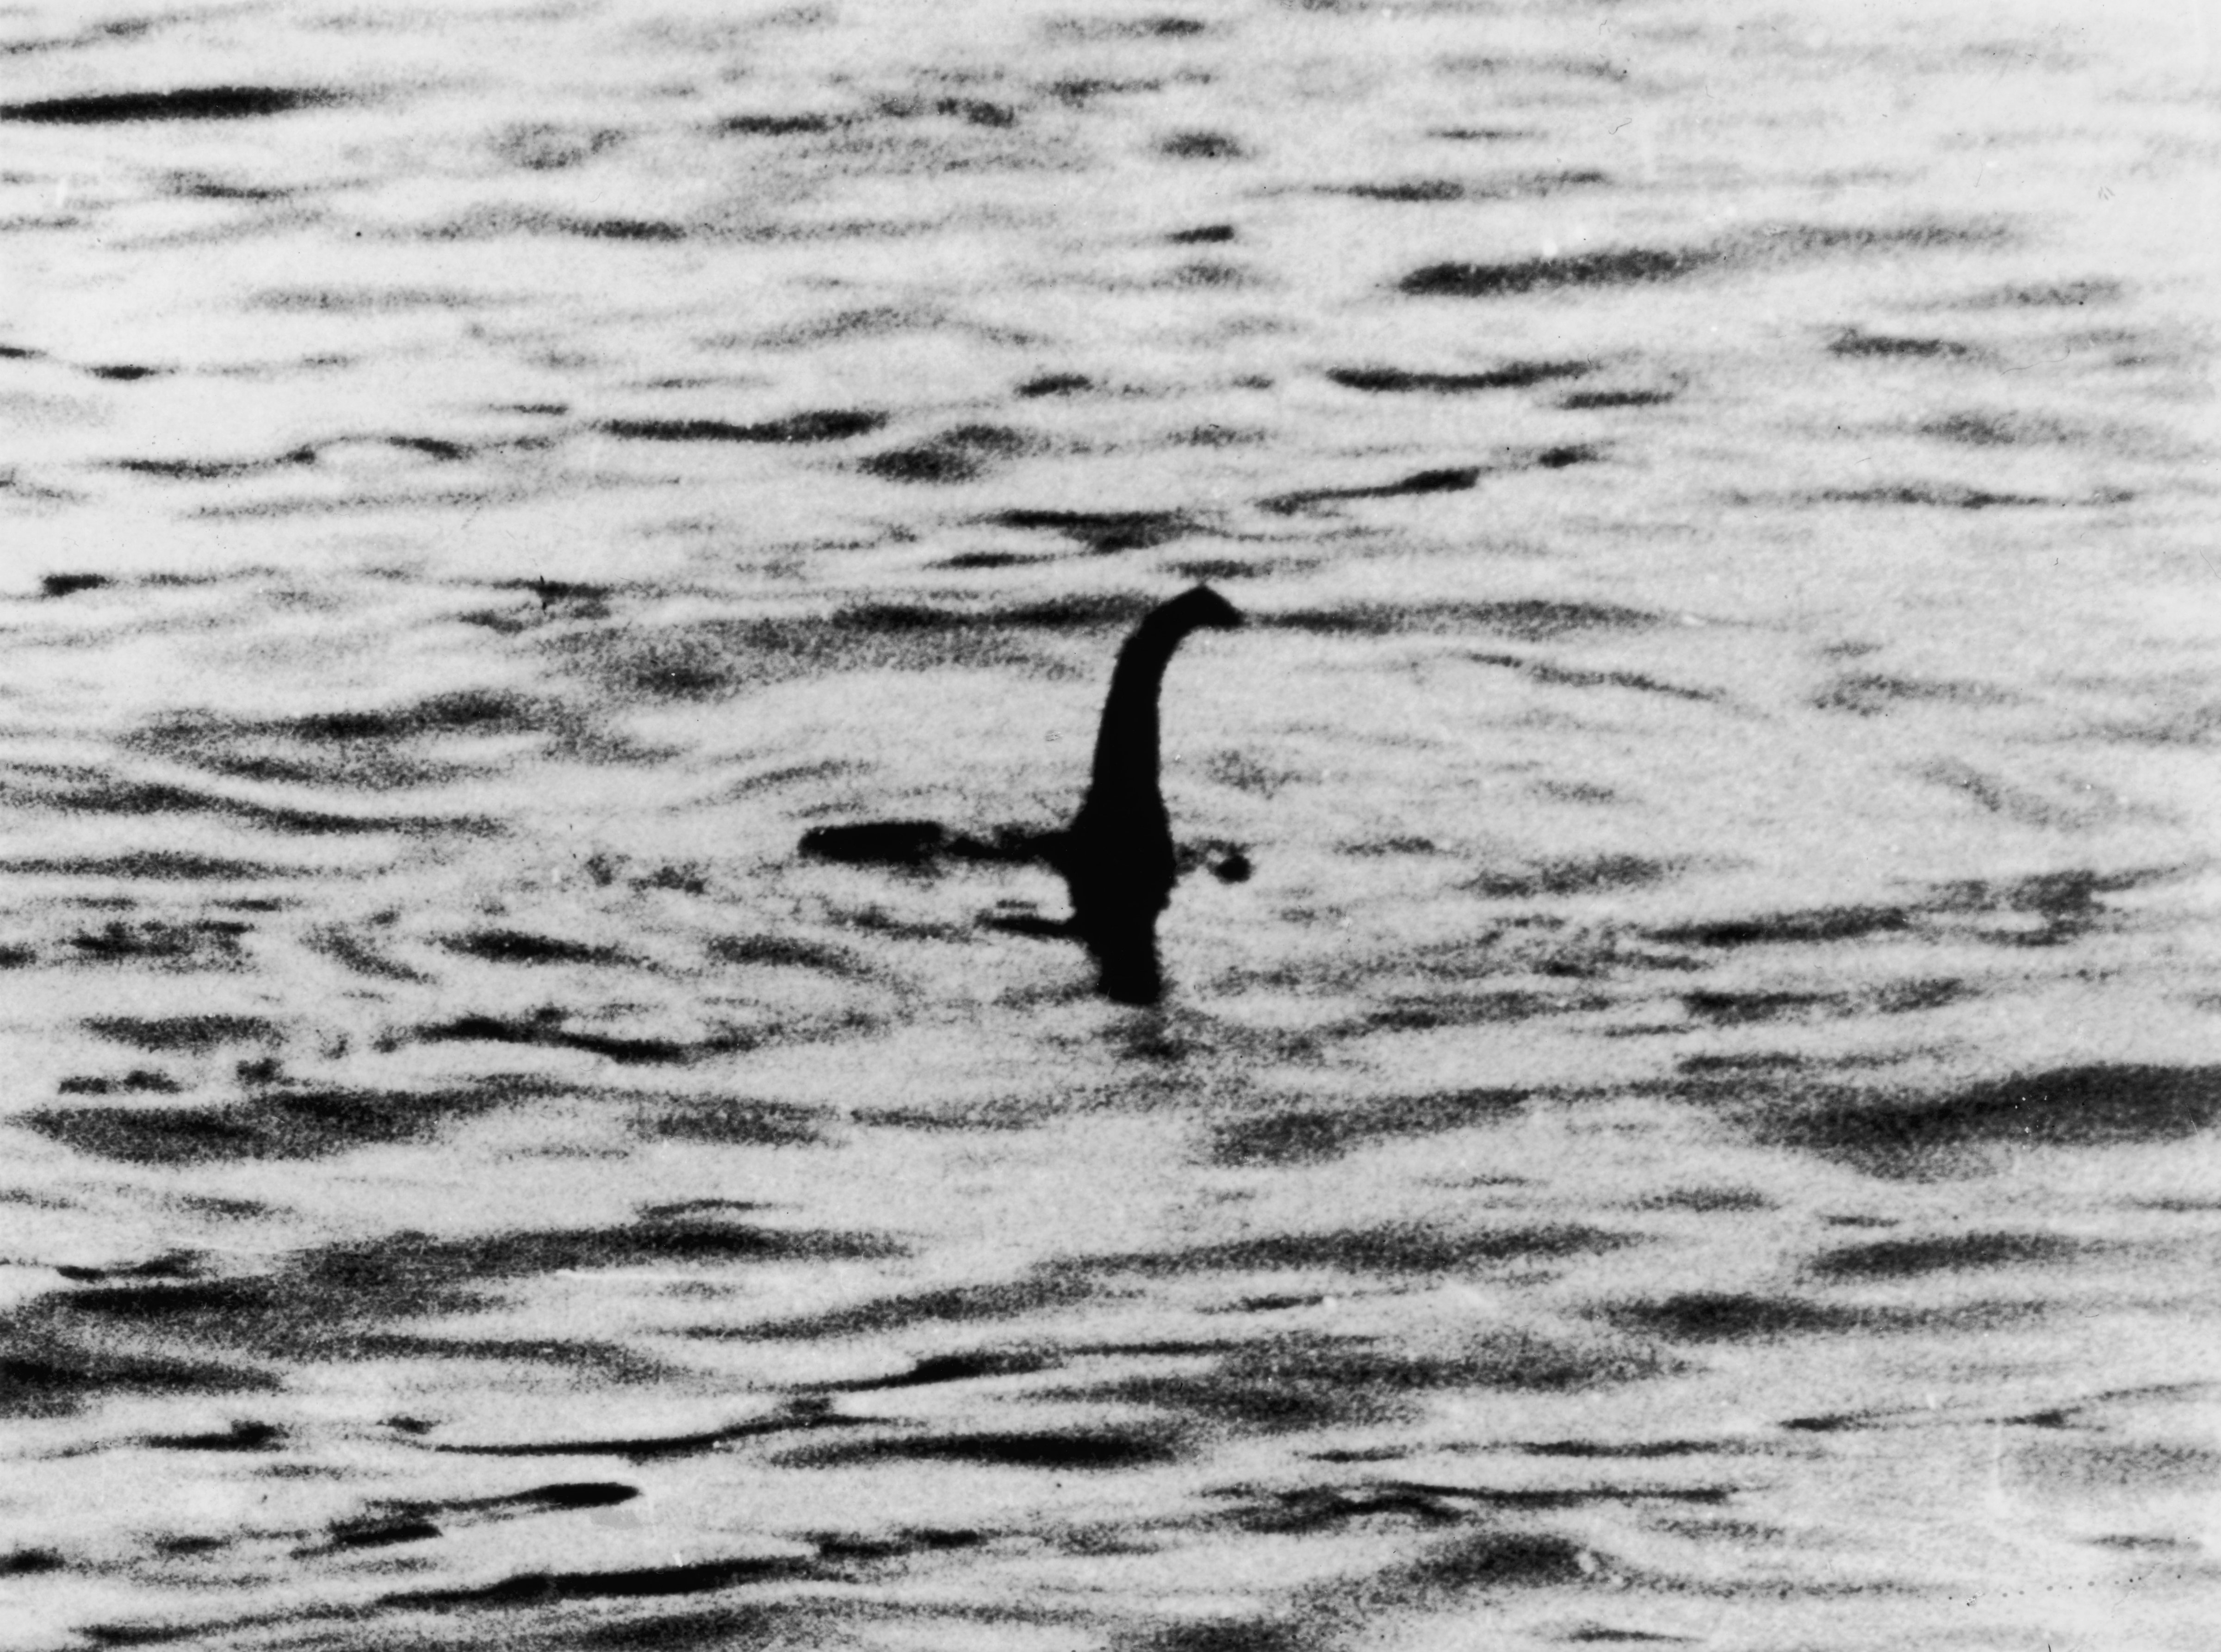 A view of the Loch Ness Monster, near Inverness, Scotland, April 19, 1934. (Keystone—Getty Images)